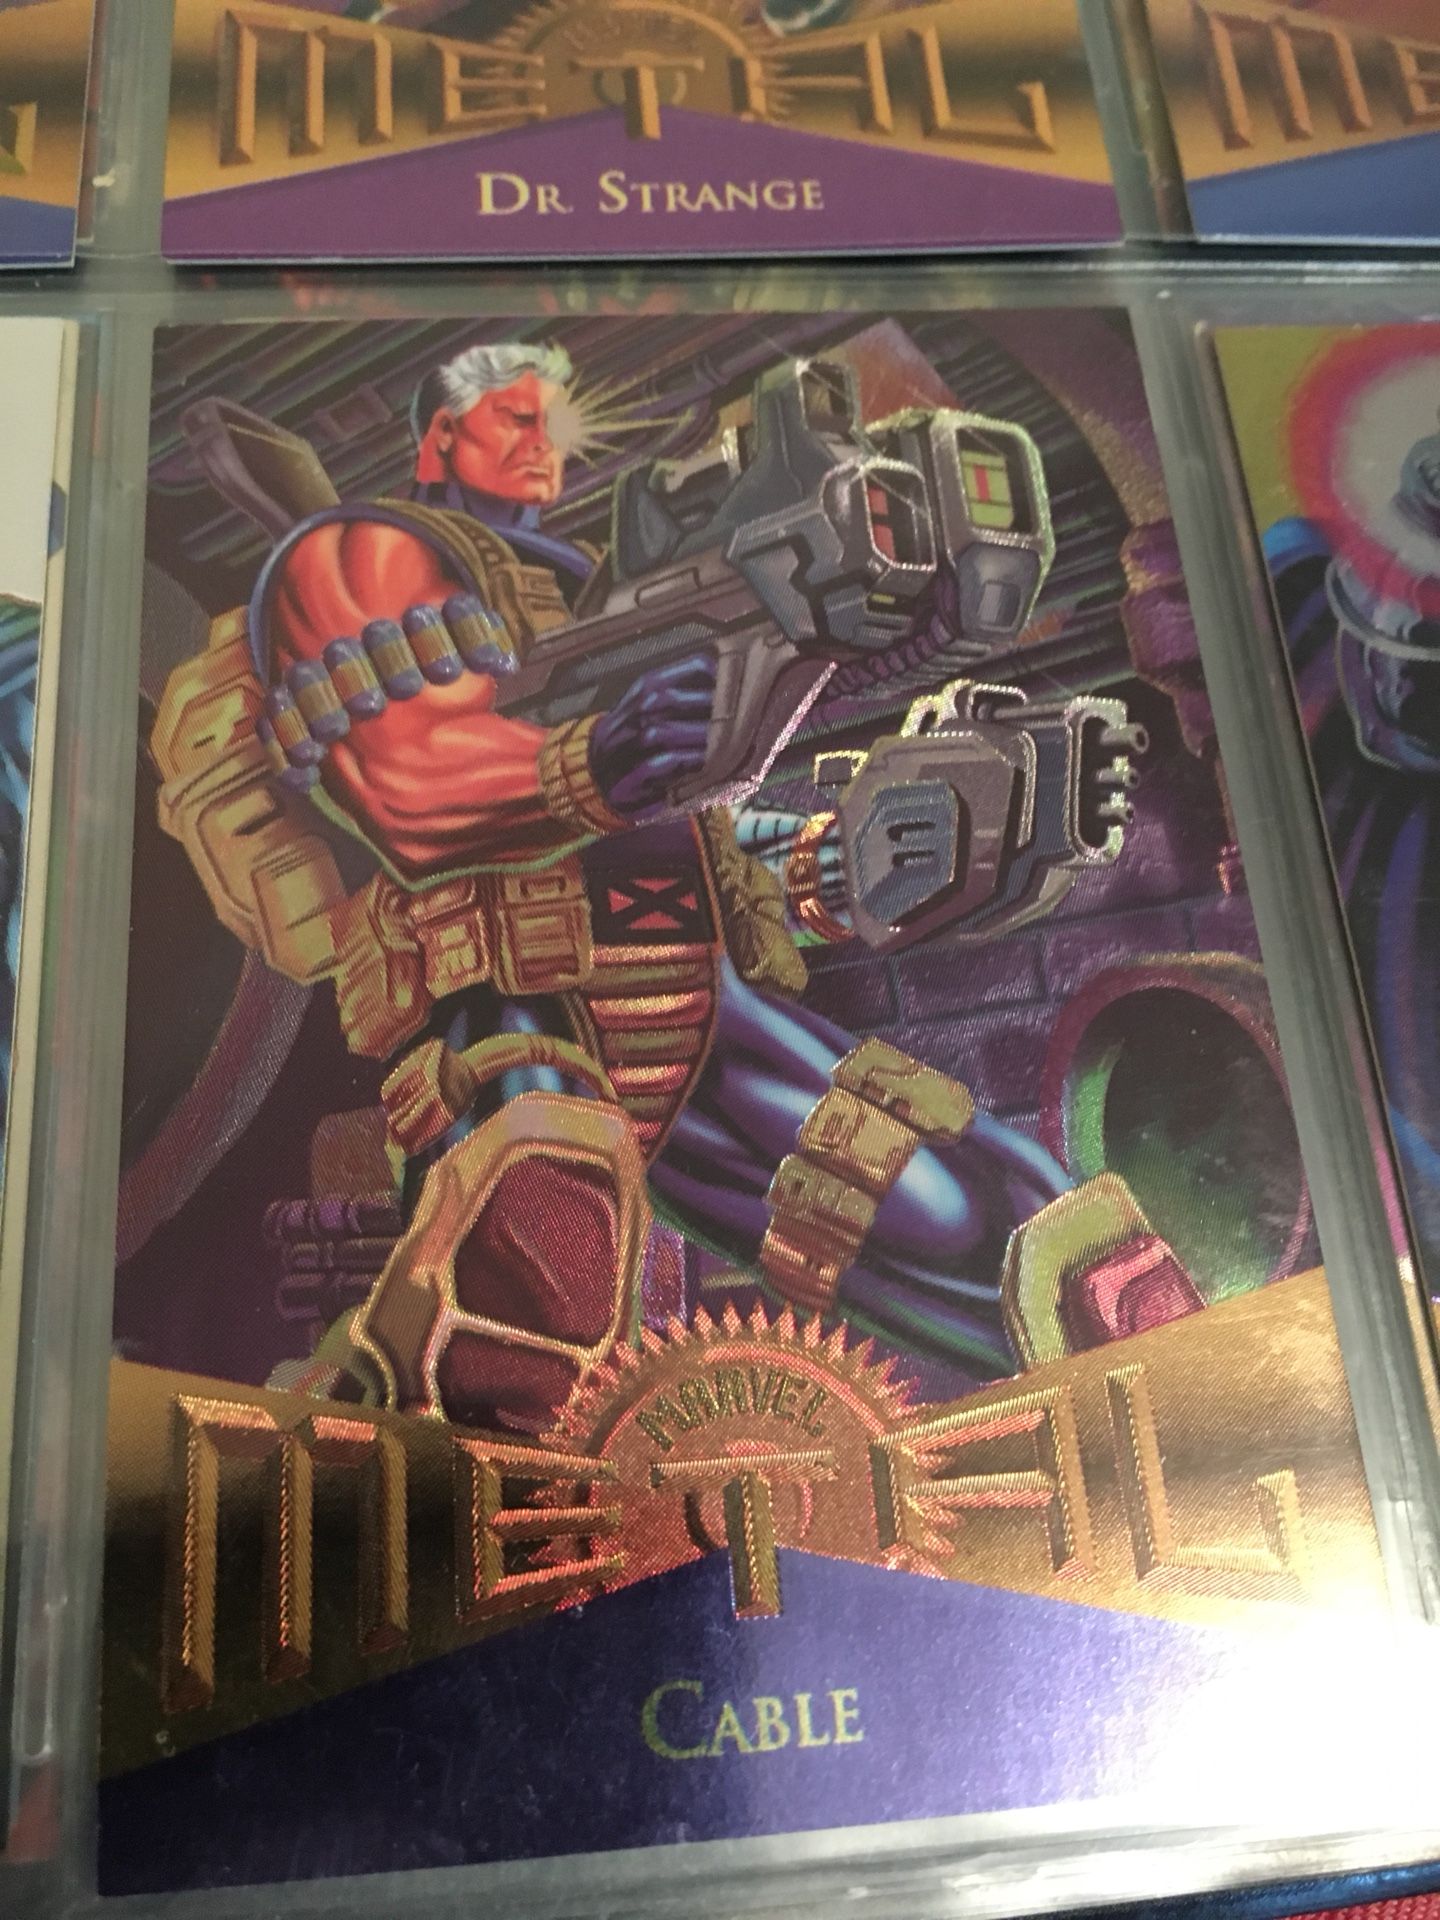 Cable marvel Cards and two bonus Cable Comics!! Fantastic condition!!